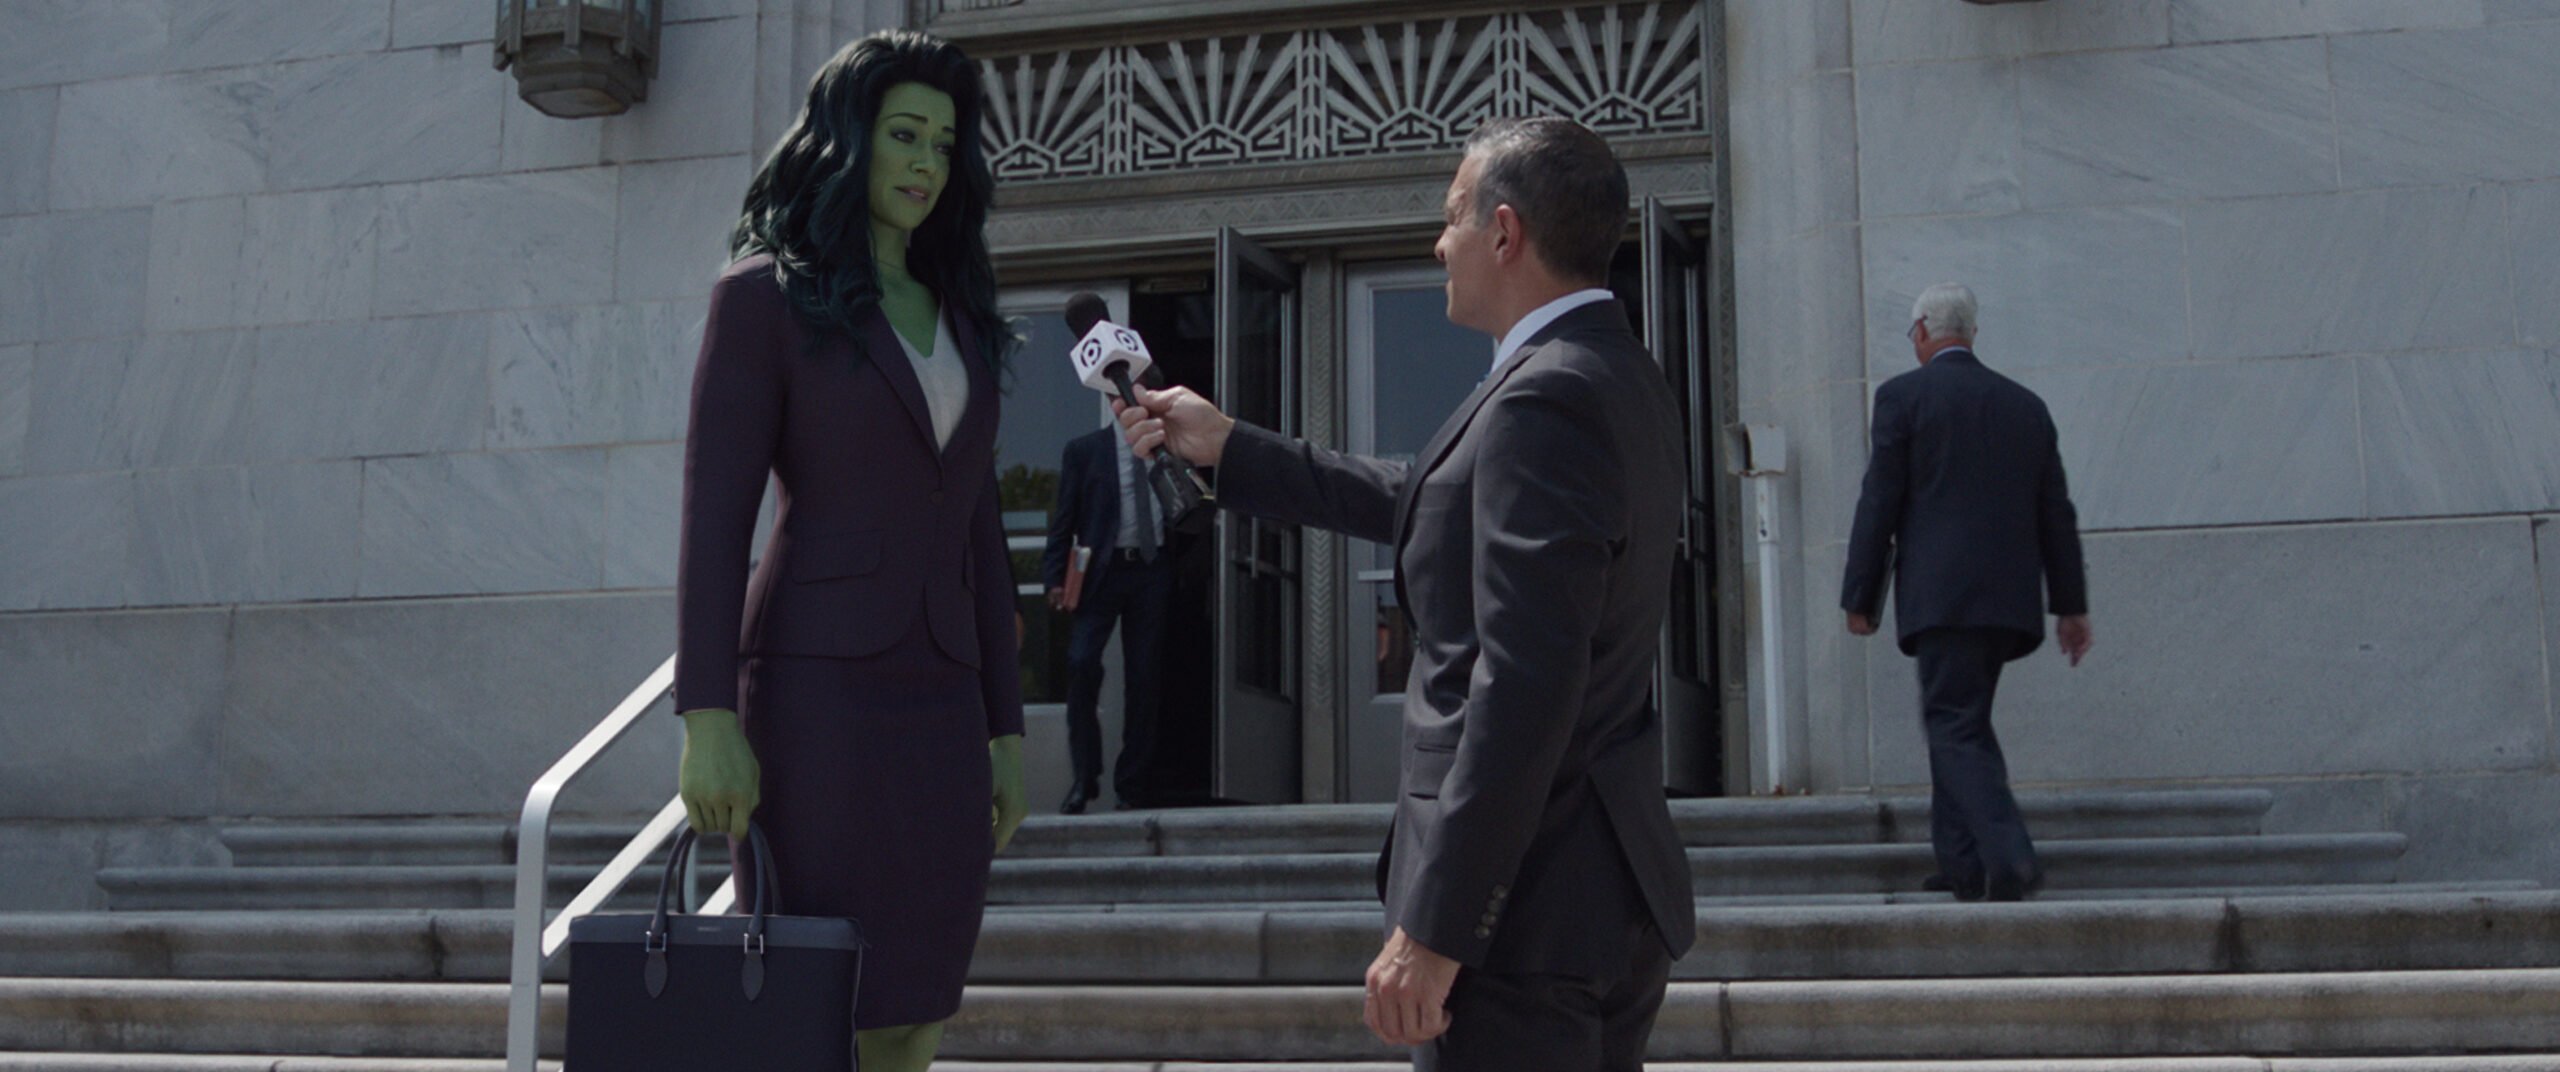 She-Hulk Is Feminist TRASH  Becomes LOWEST Rated MCU Show On